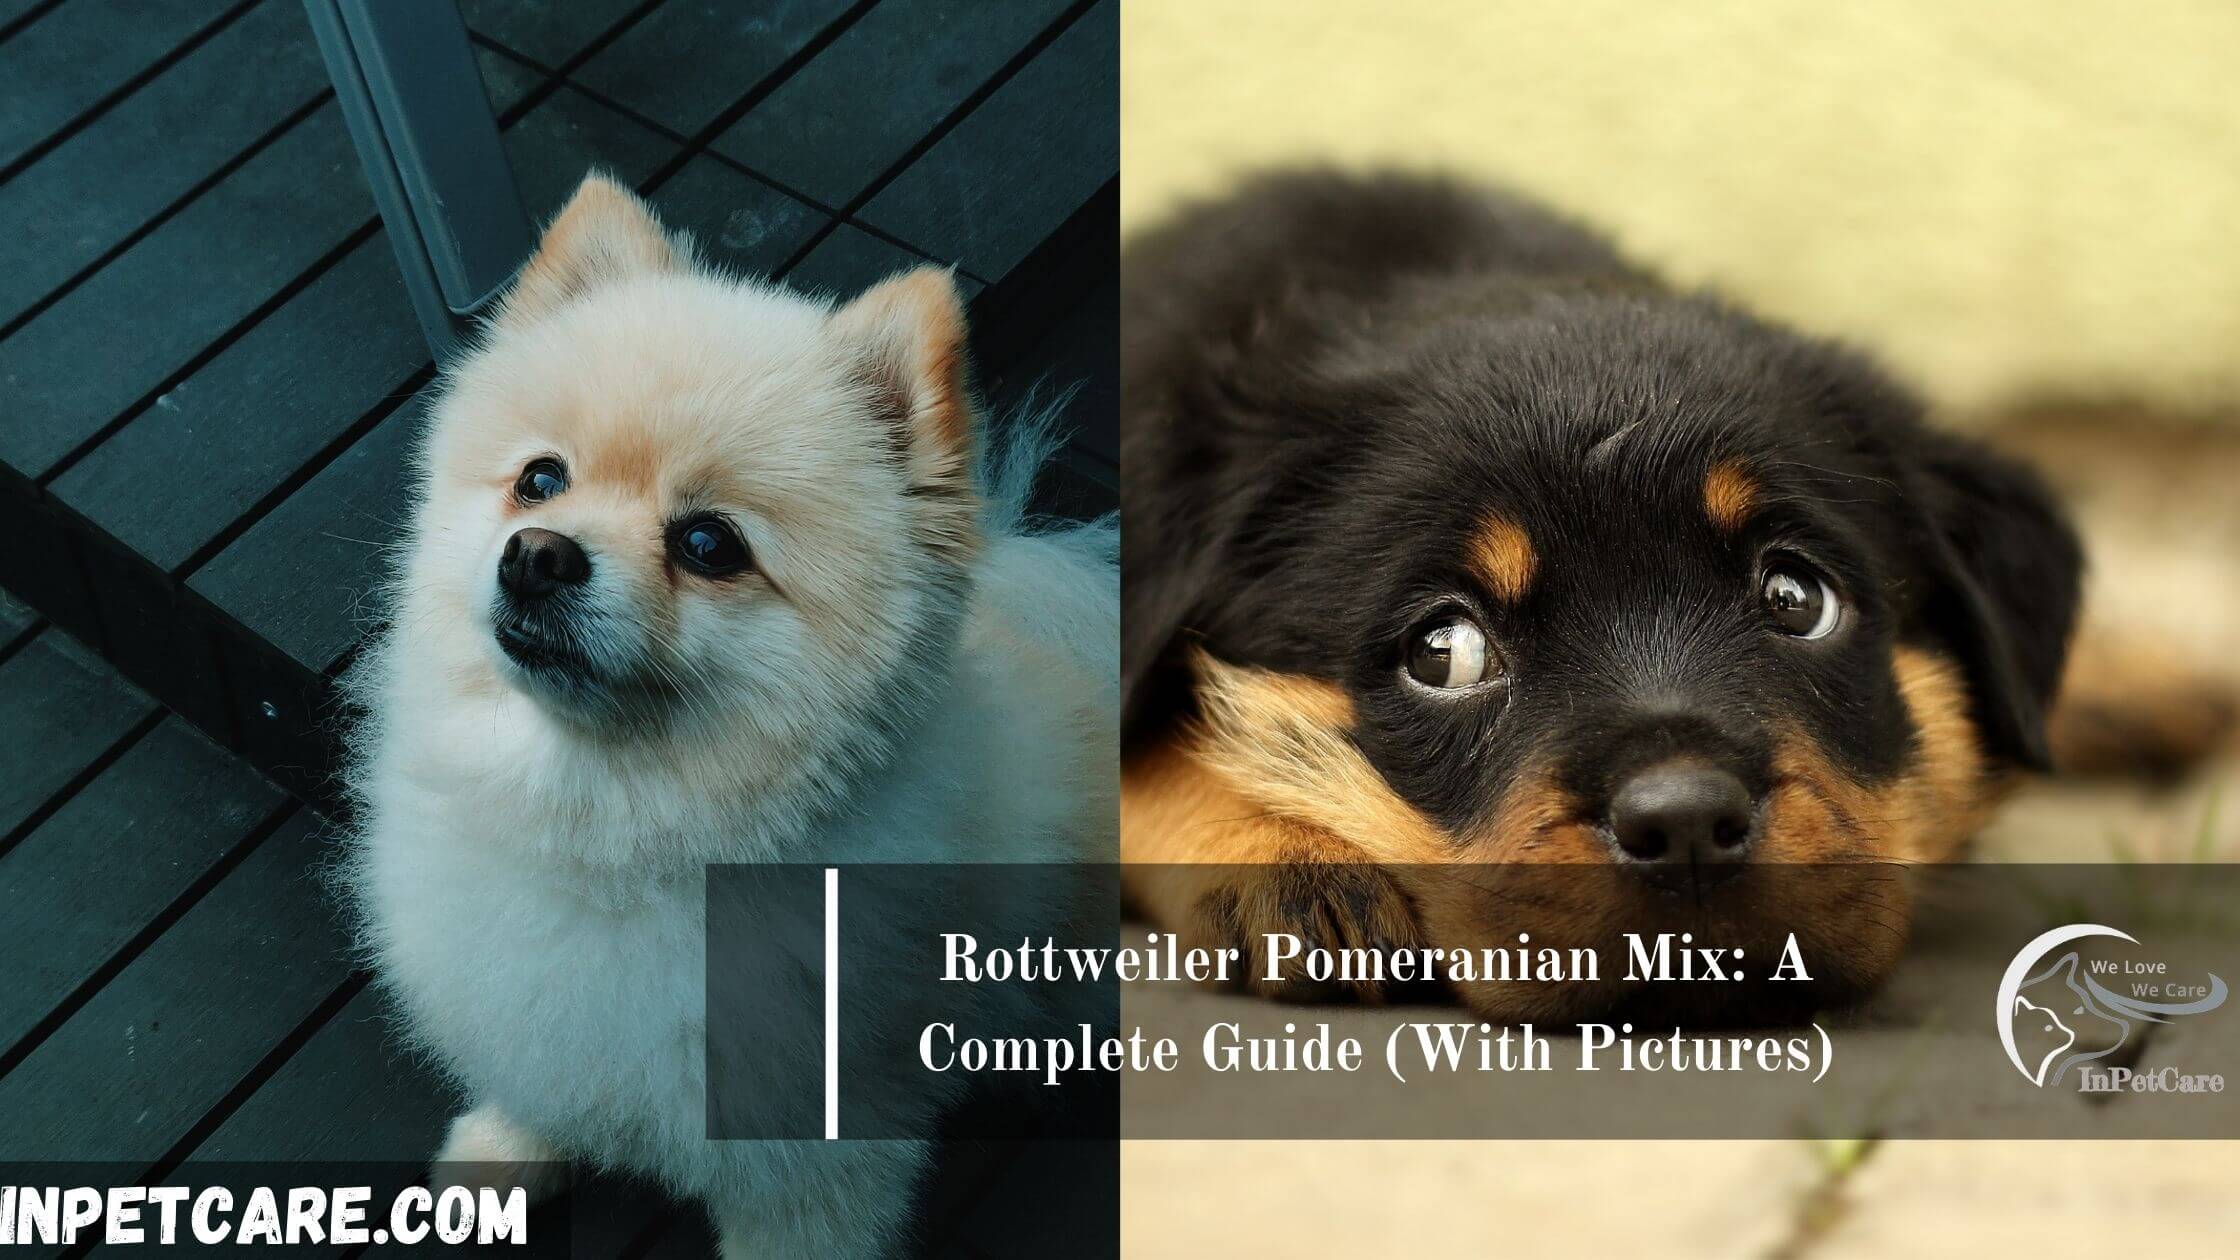 Rottweiler Pomeranian Mix: A Complete Guide (With Pictures)